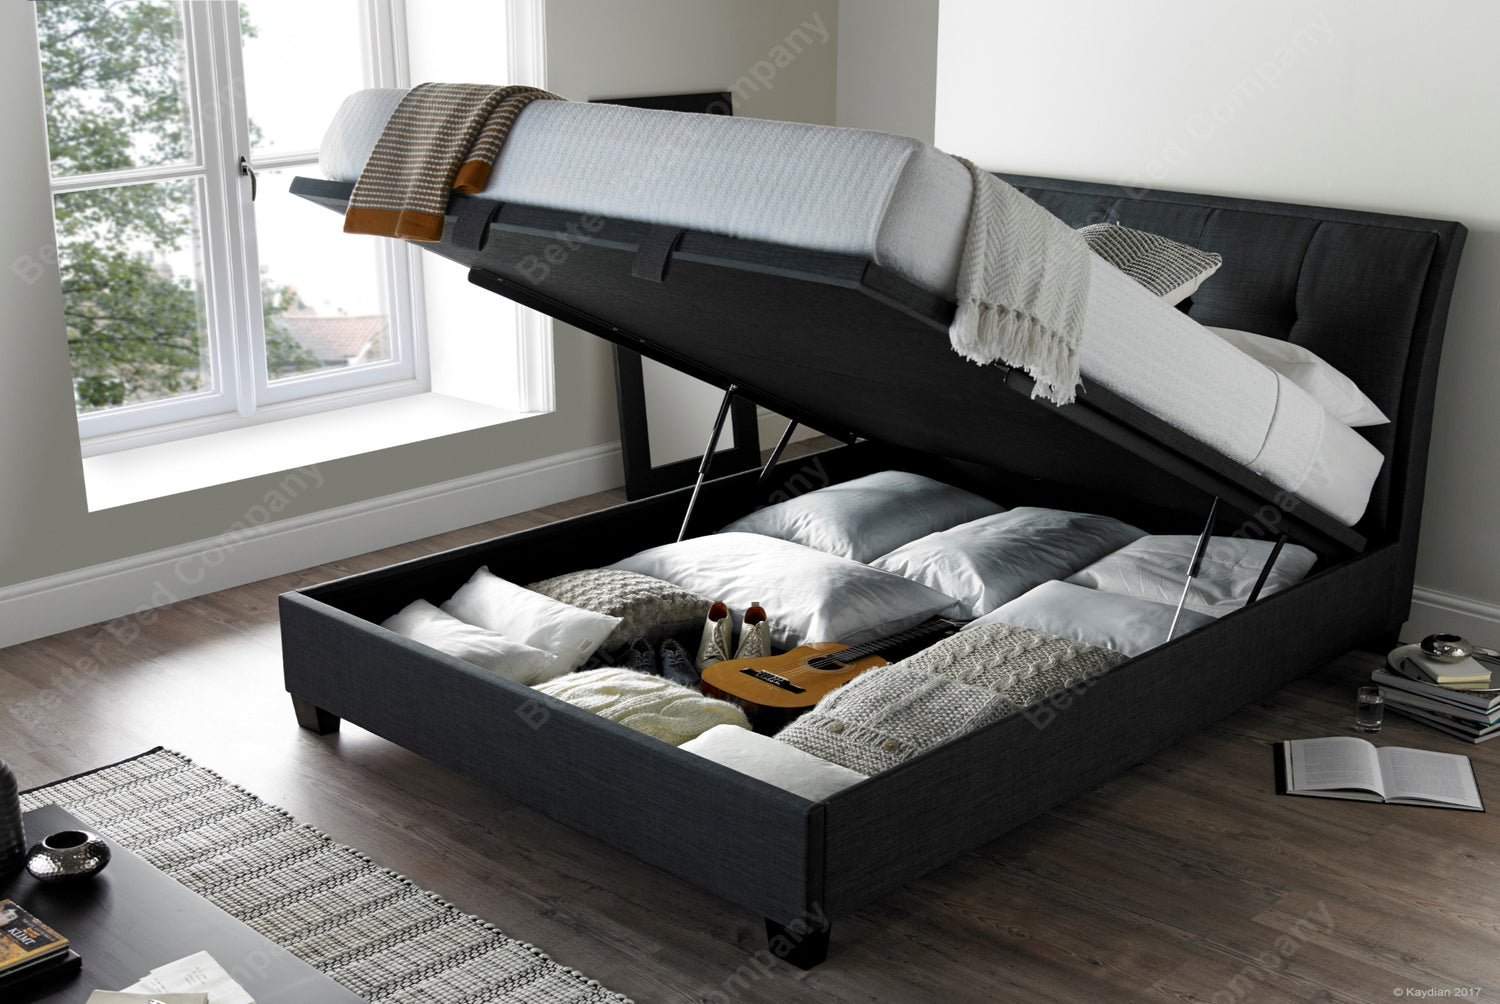 Kaydian Accent Pendle Slate Ottoman Bed Frame